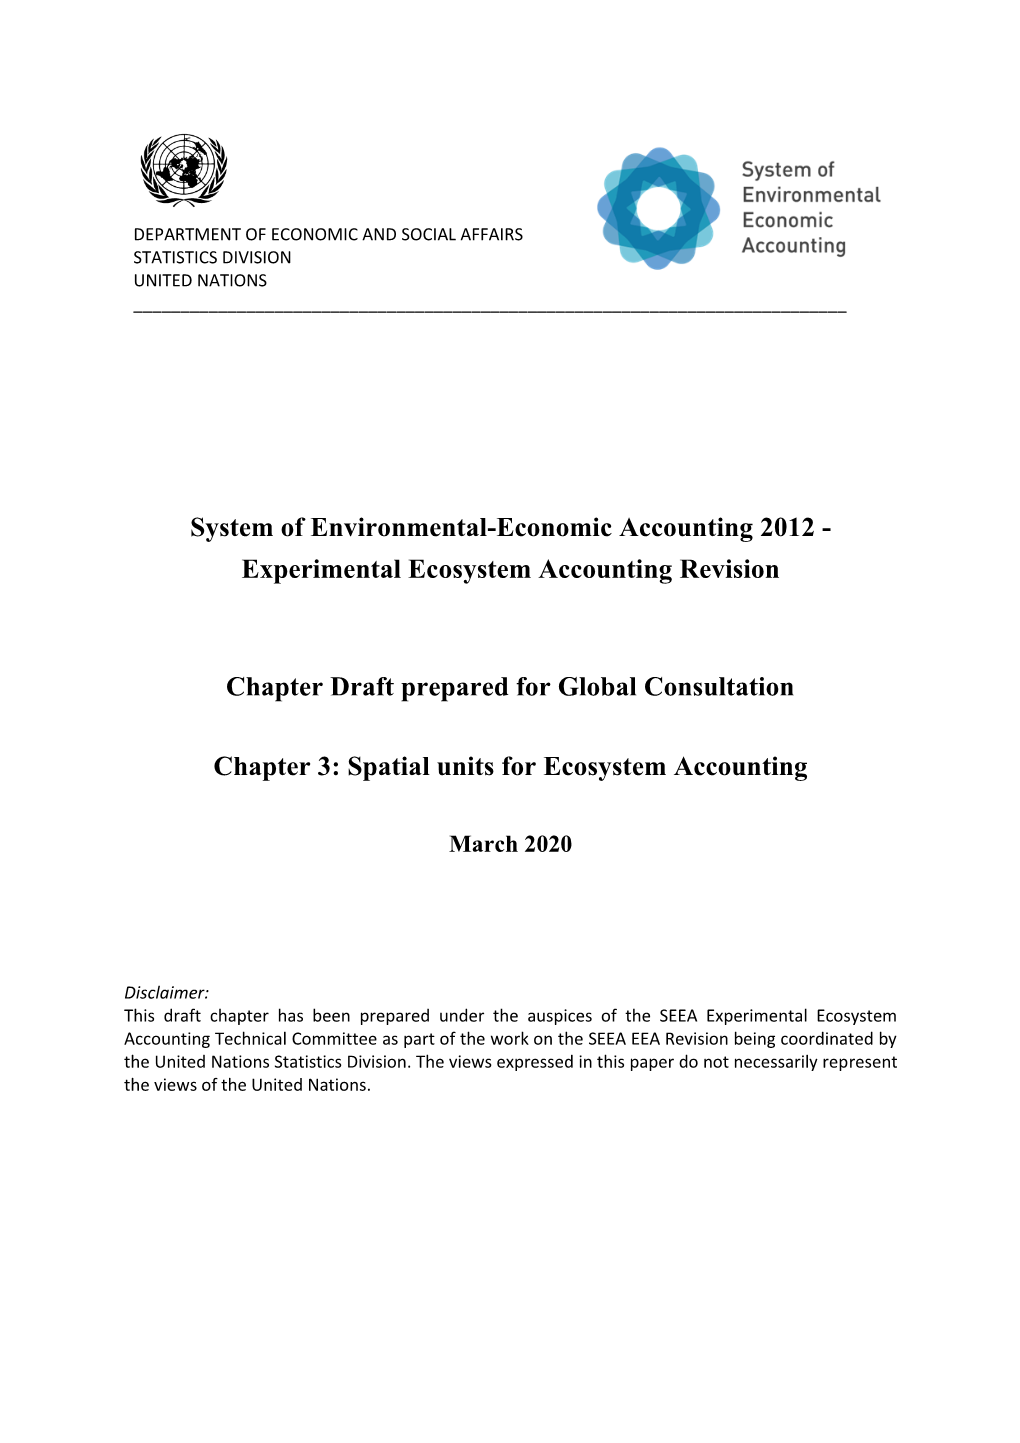 Experimental Ecosystem Accounting Revision Chapter Draft Prepared For